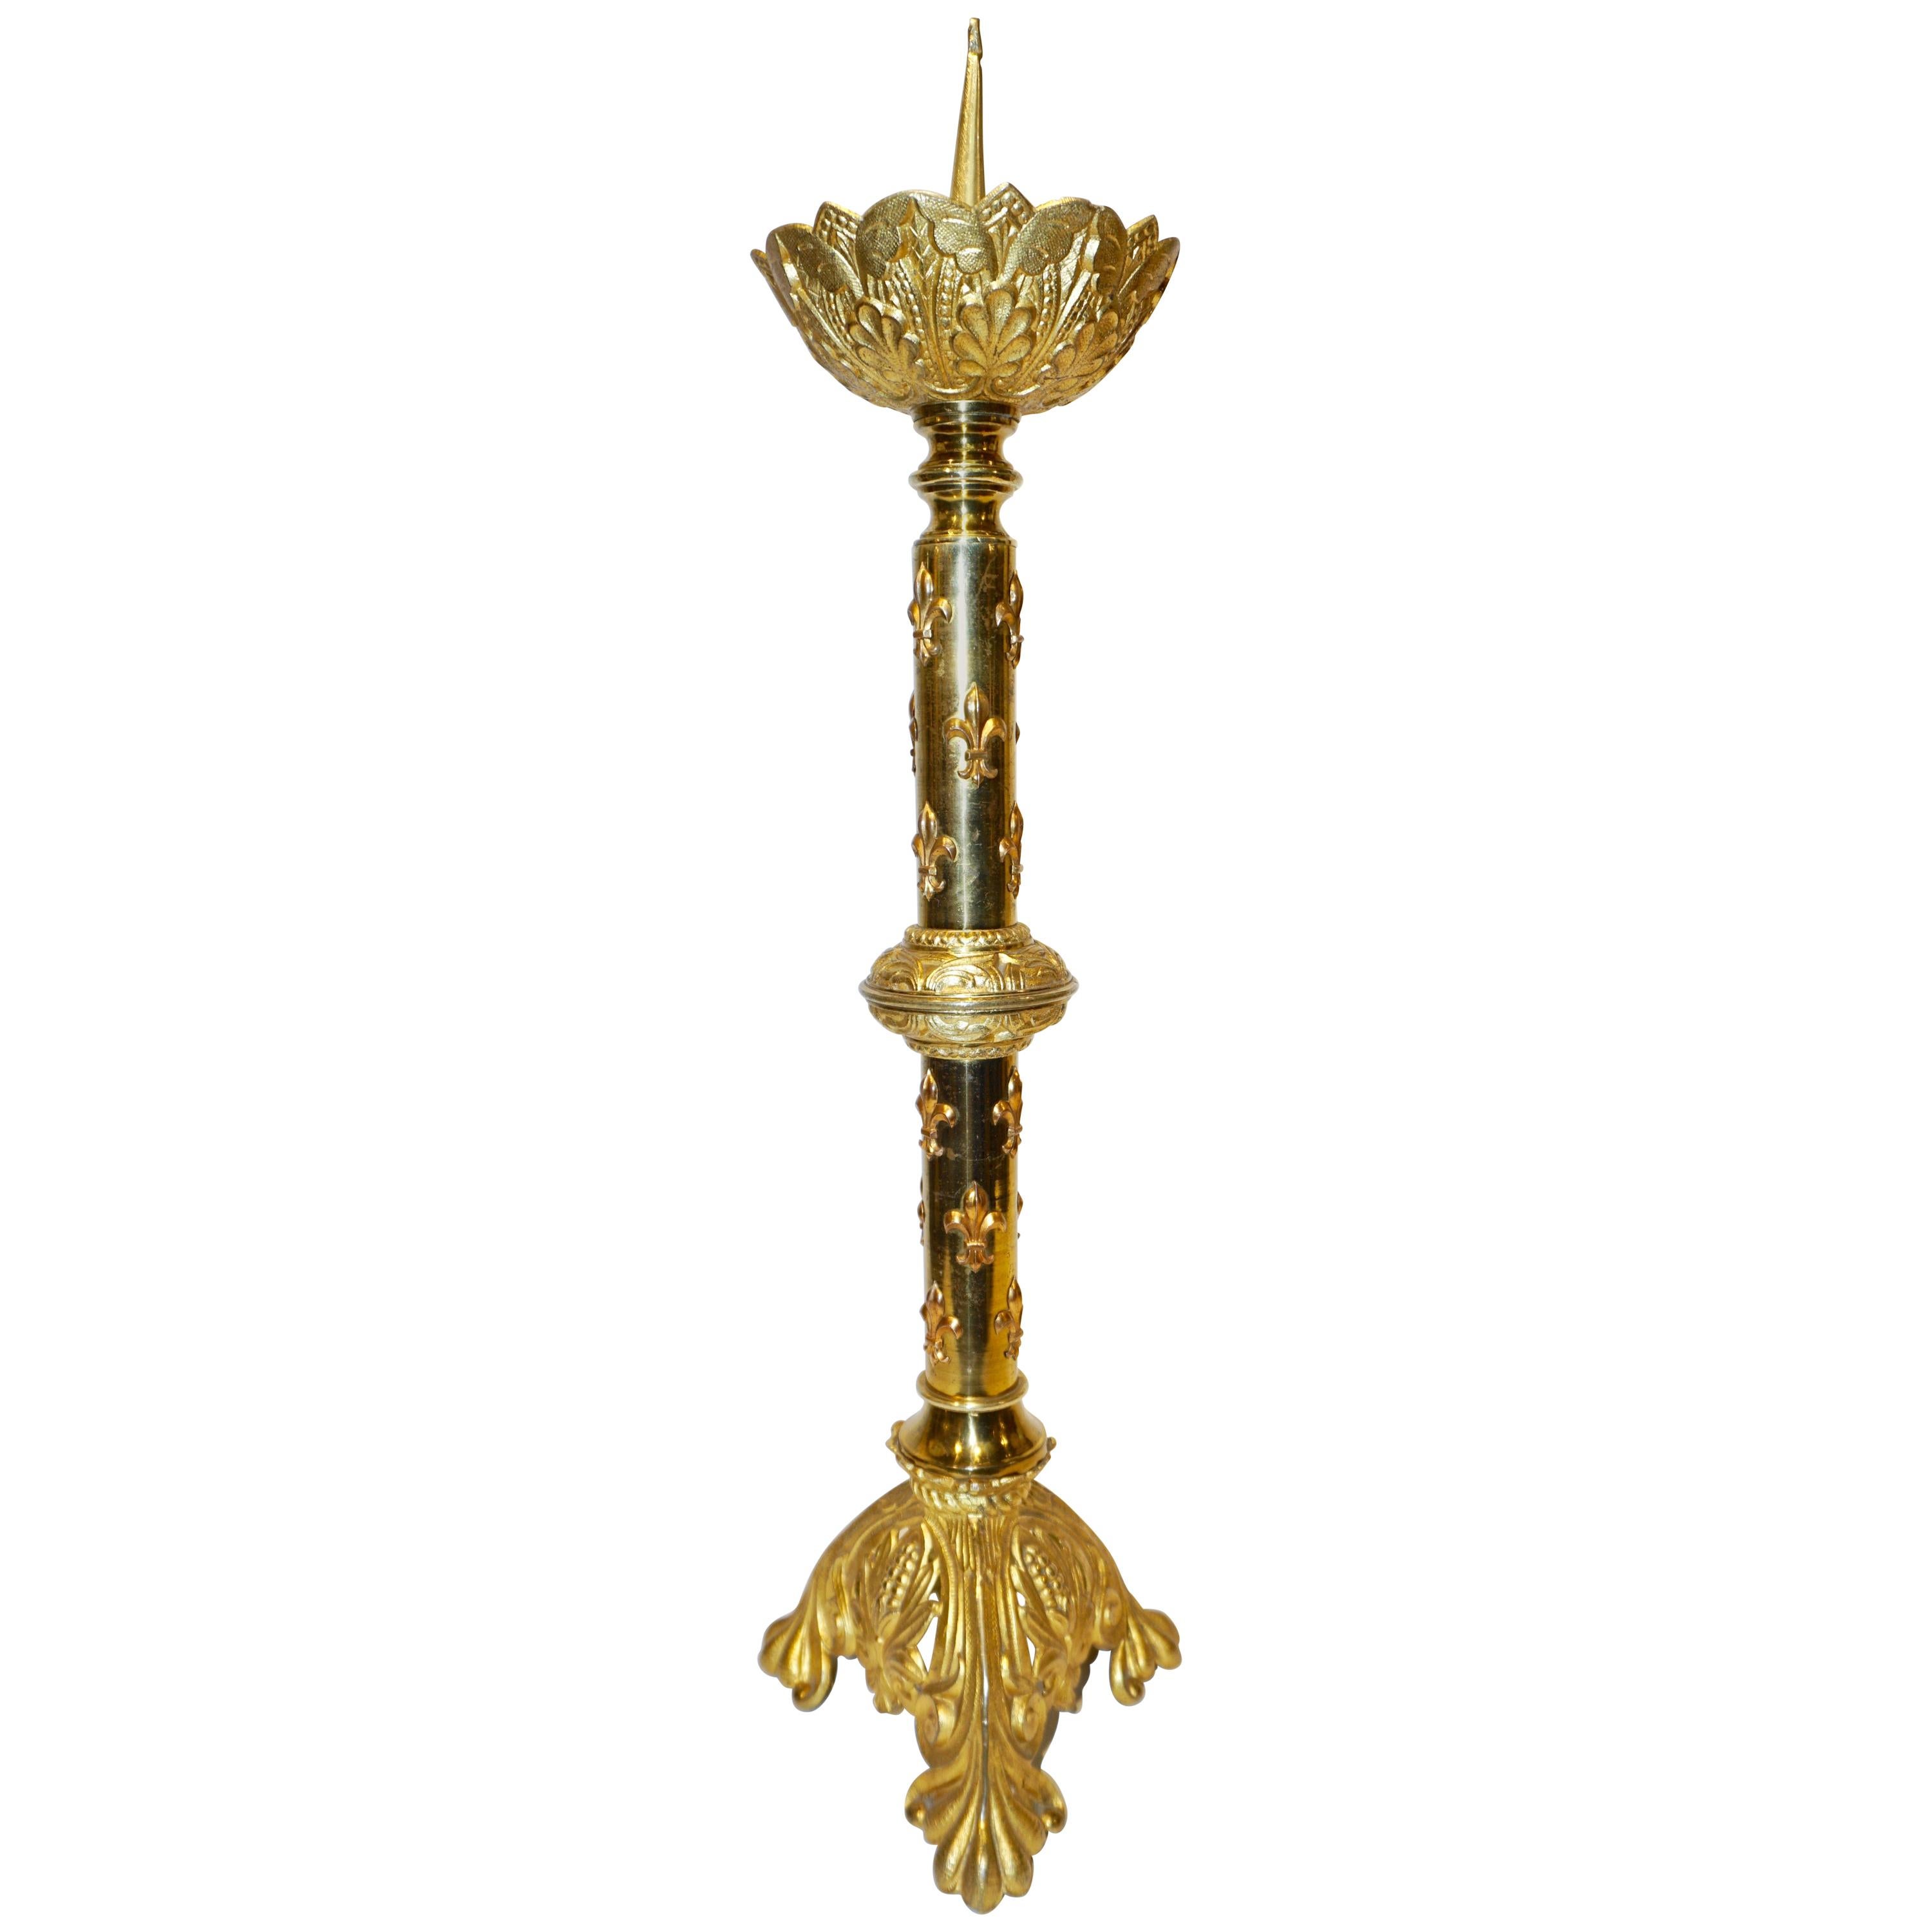 French Baroque Revival Tall Gilt Bronze Ormolu Pricket Candlestick, 1880s